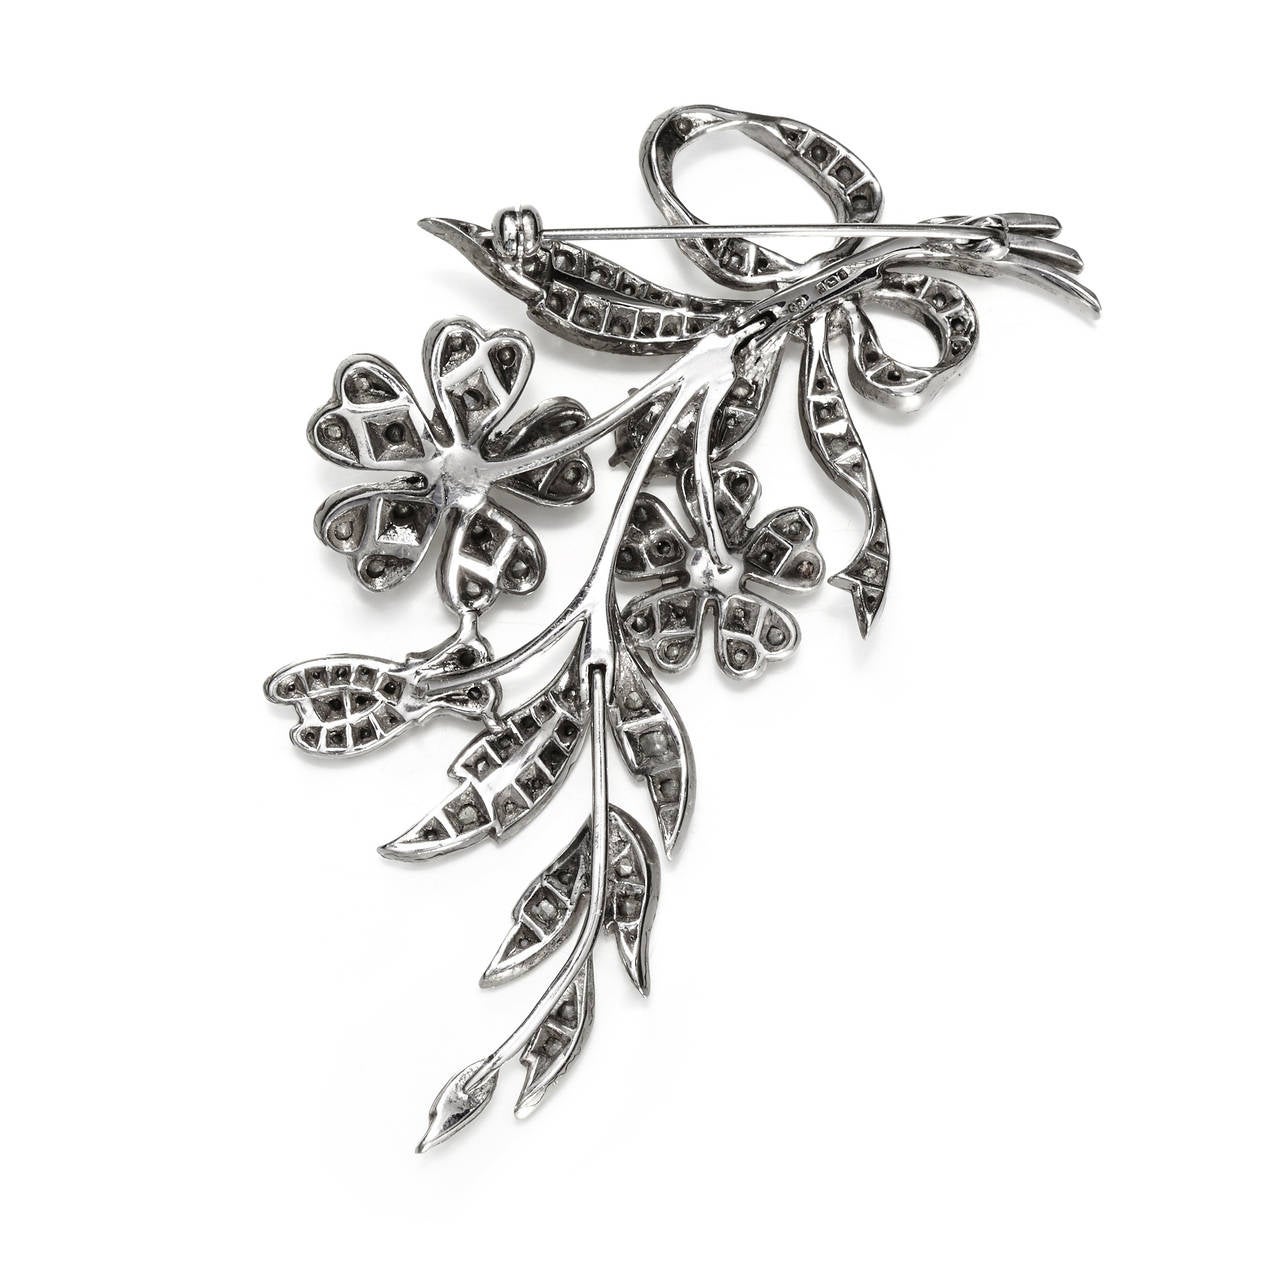 A lovely floral spray brooch in a classic feminine design by English costume jeweller Ciro Pearls.

Made of sterling silver set with crystal rhinestones in a delicately articulated design made up of three pieces, fully hallmarked.

Marked: